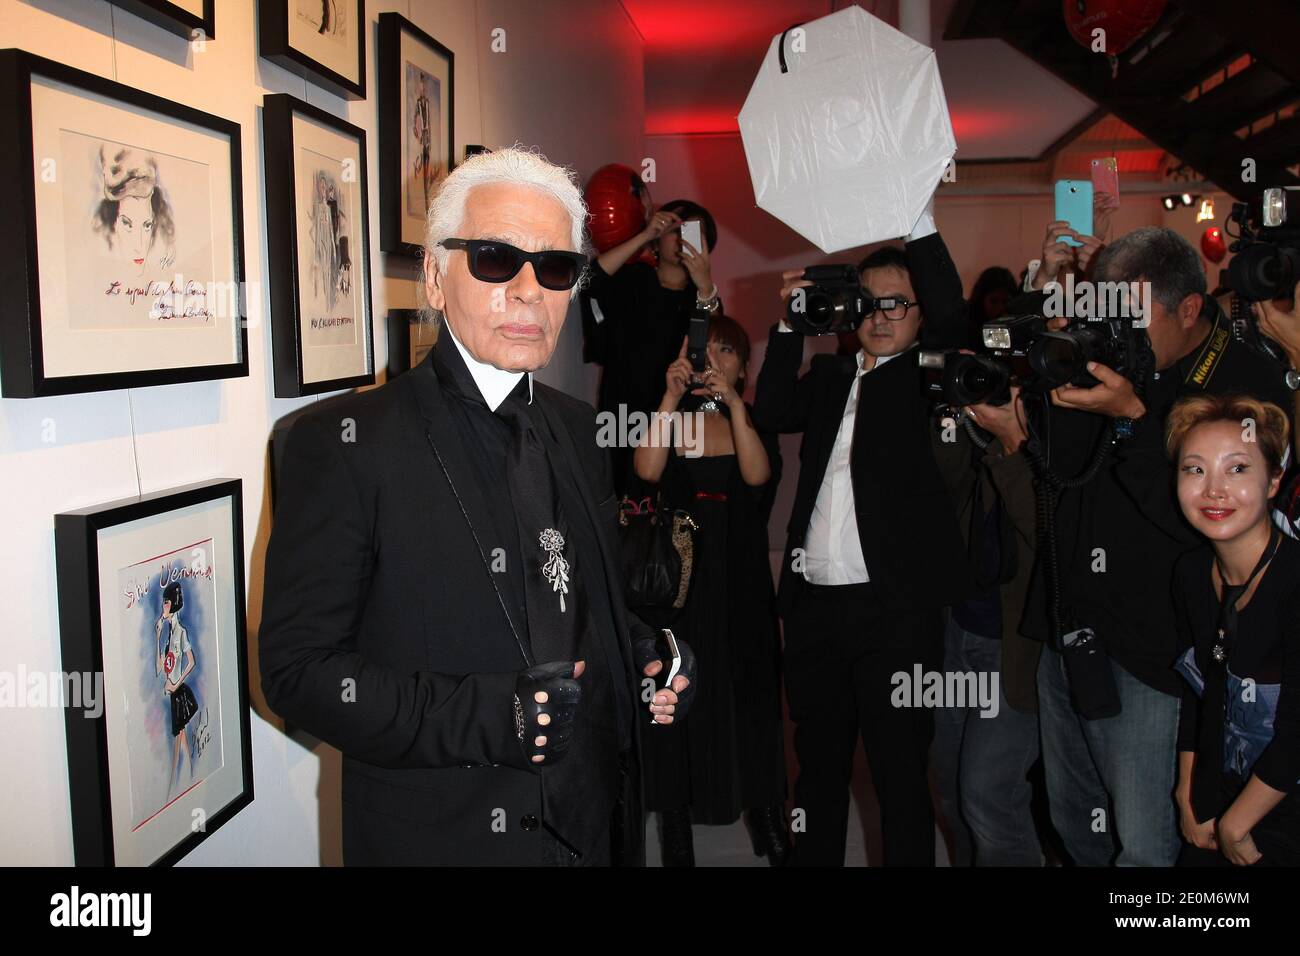 Karl Lagerfeld attends at the Sho Uemura event at Espace Commines